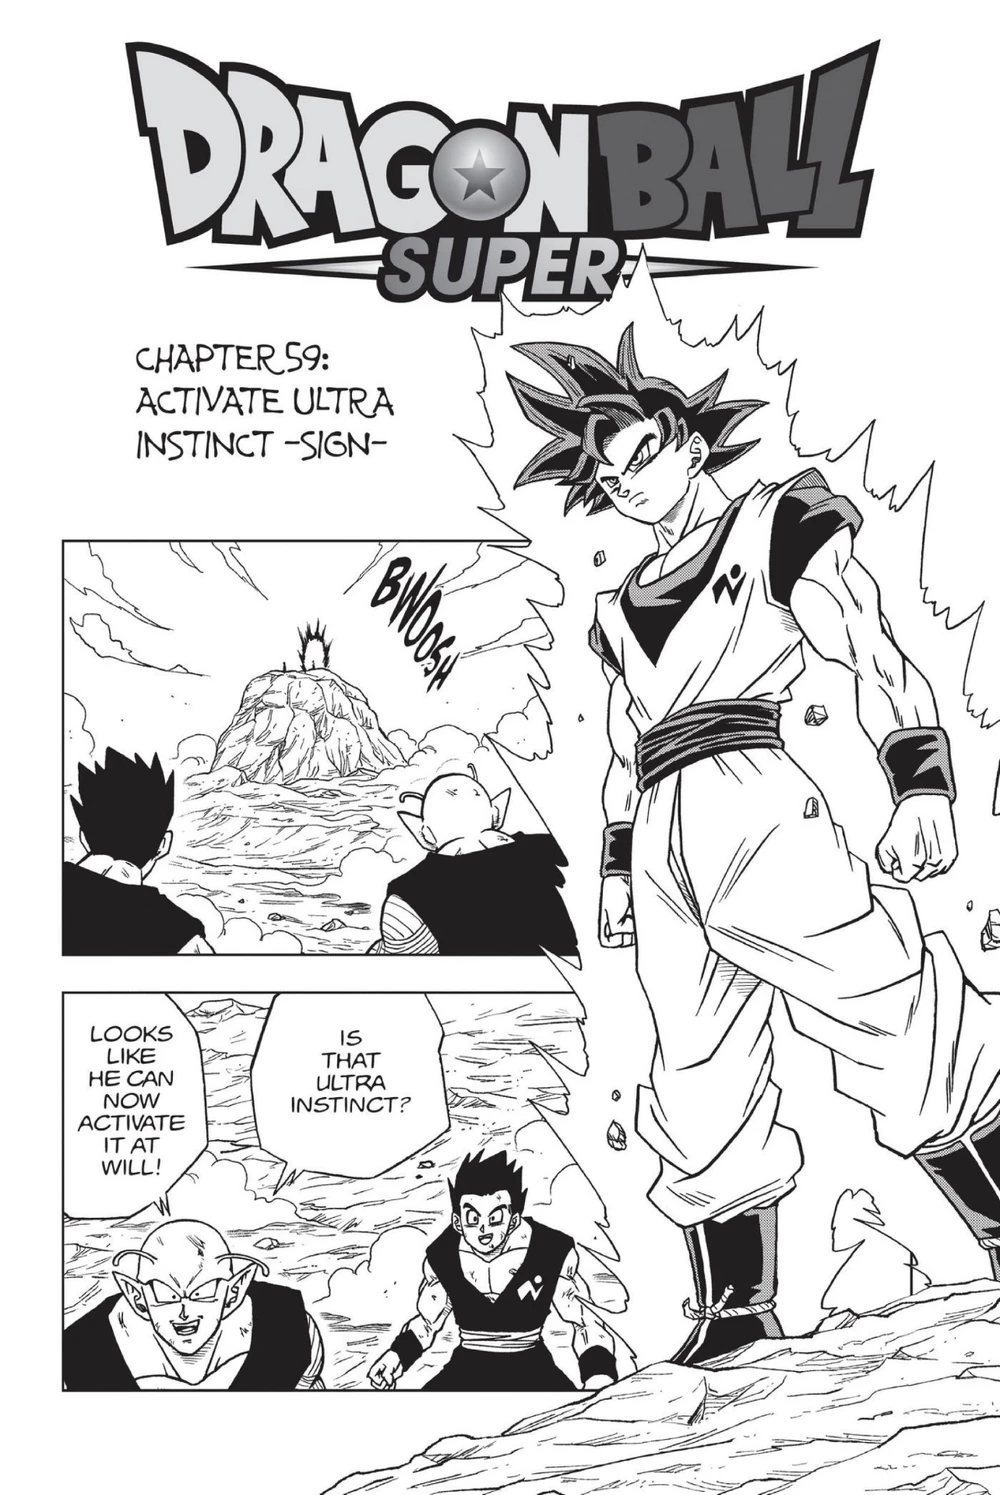 Piccolo and Gohan witness Goku's control of Ultra Instinct Sign in Dragon Ball Super Chapter 59 "Activate Ultra Instinct -Sign-" (2022), Shueisha, Words and art by Toyotaro. via Digital Issue